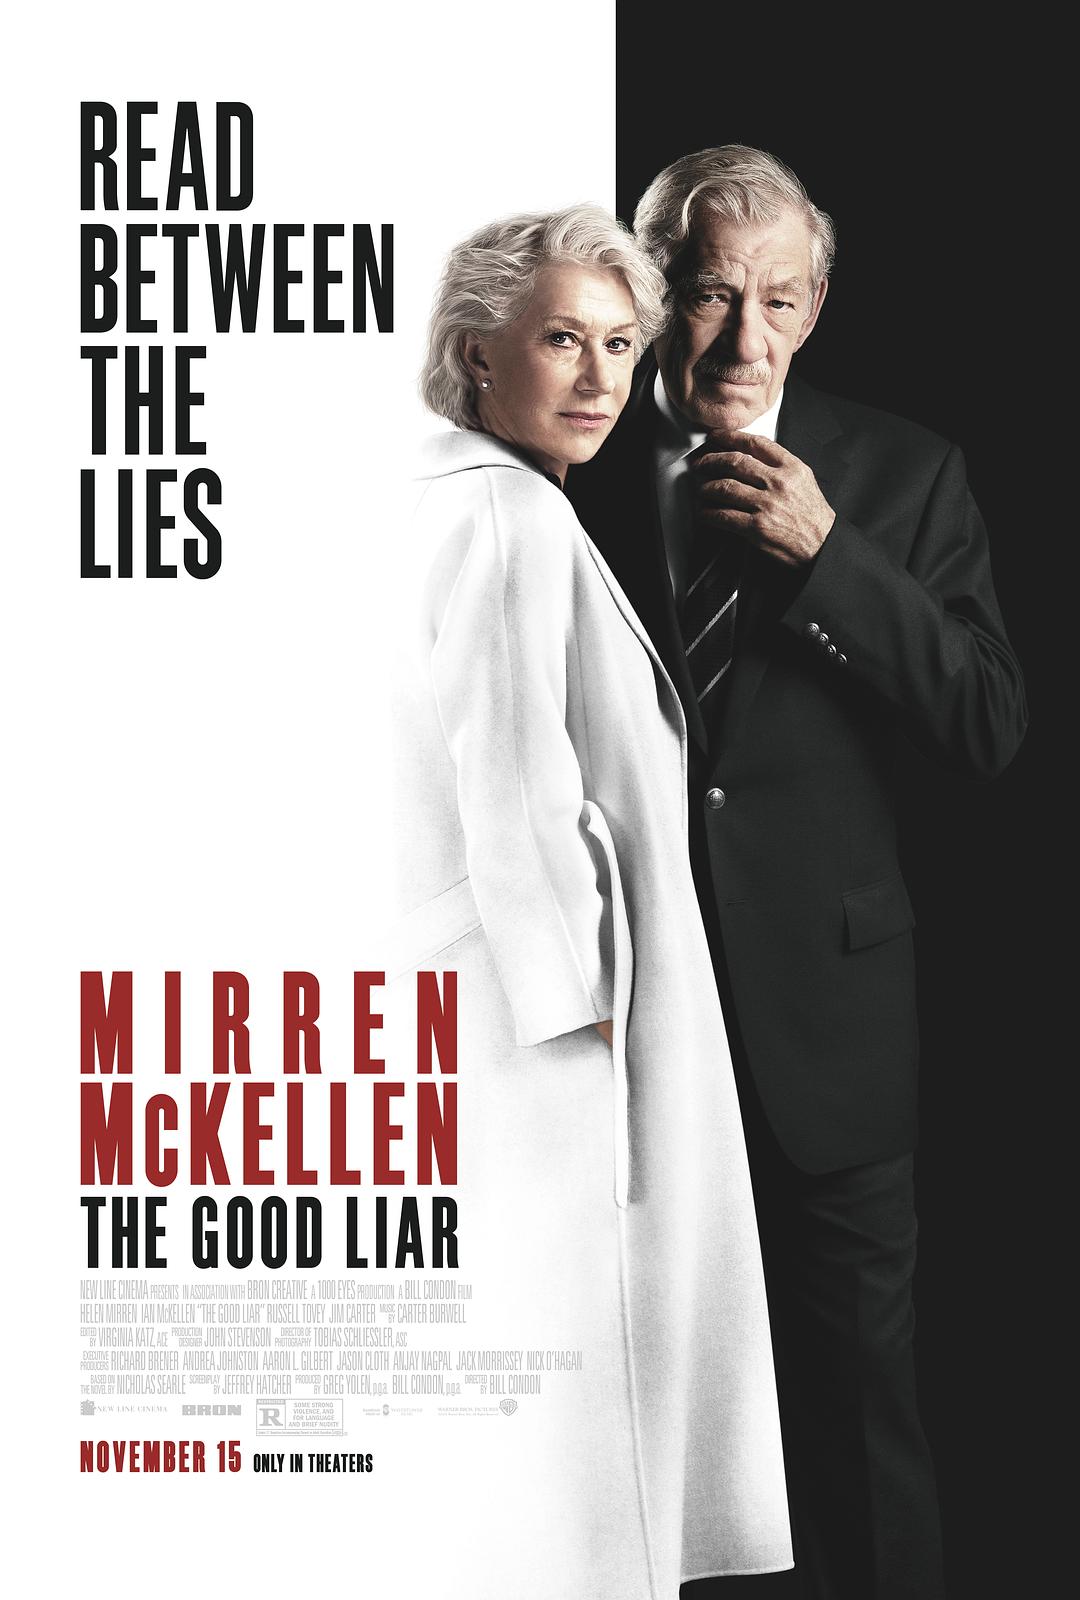 Դʦ/˵Ѽ The.Good.Liar.2019.1080p.BluRay.AVC.DTS-HD.MA.5.1-DiSRUPTION 38.84GB-1.png